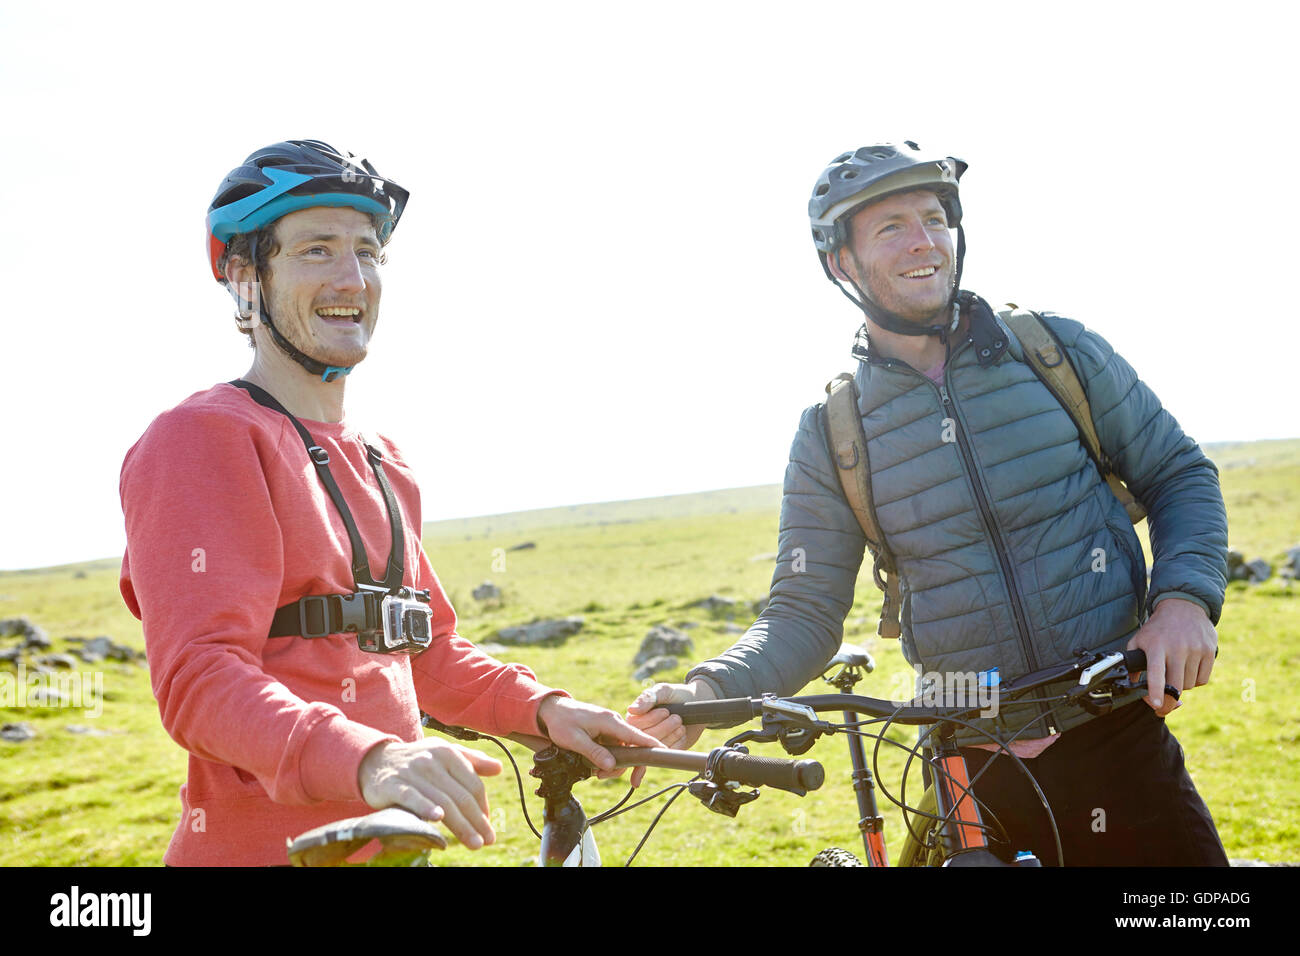 Cyclists on hillside holding bicycles looking away Stock Photo